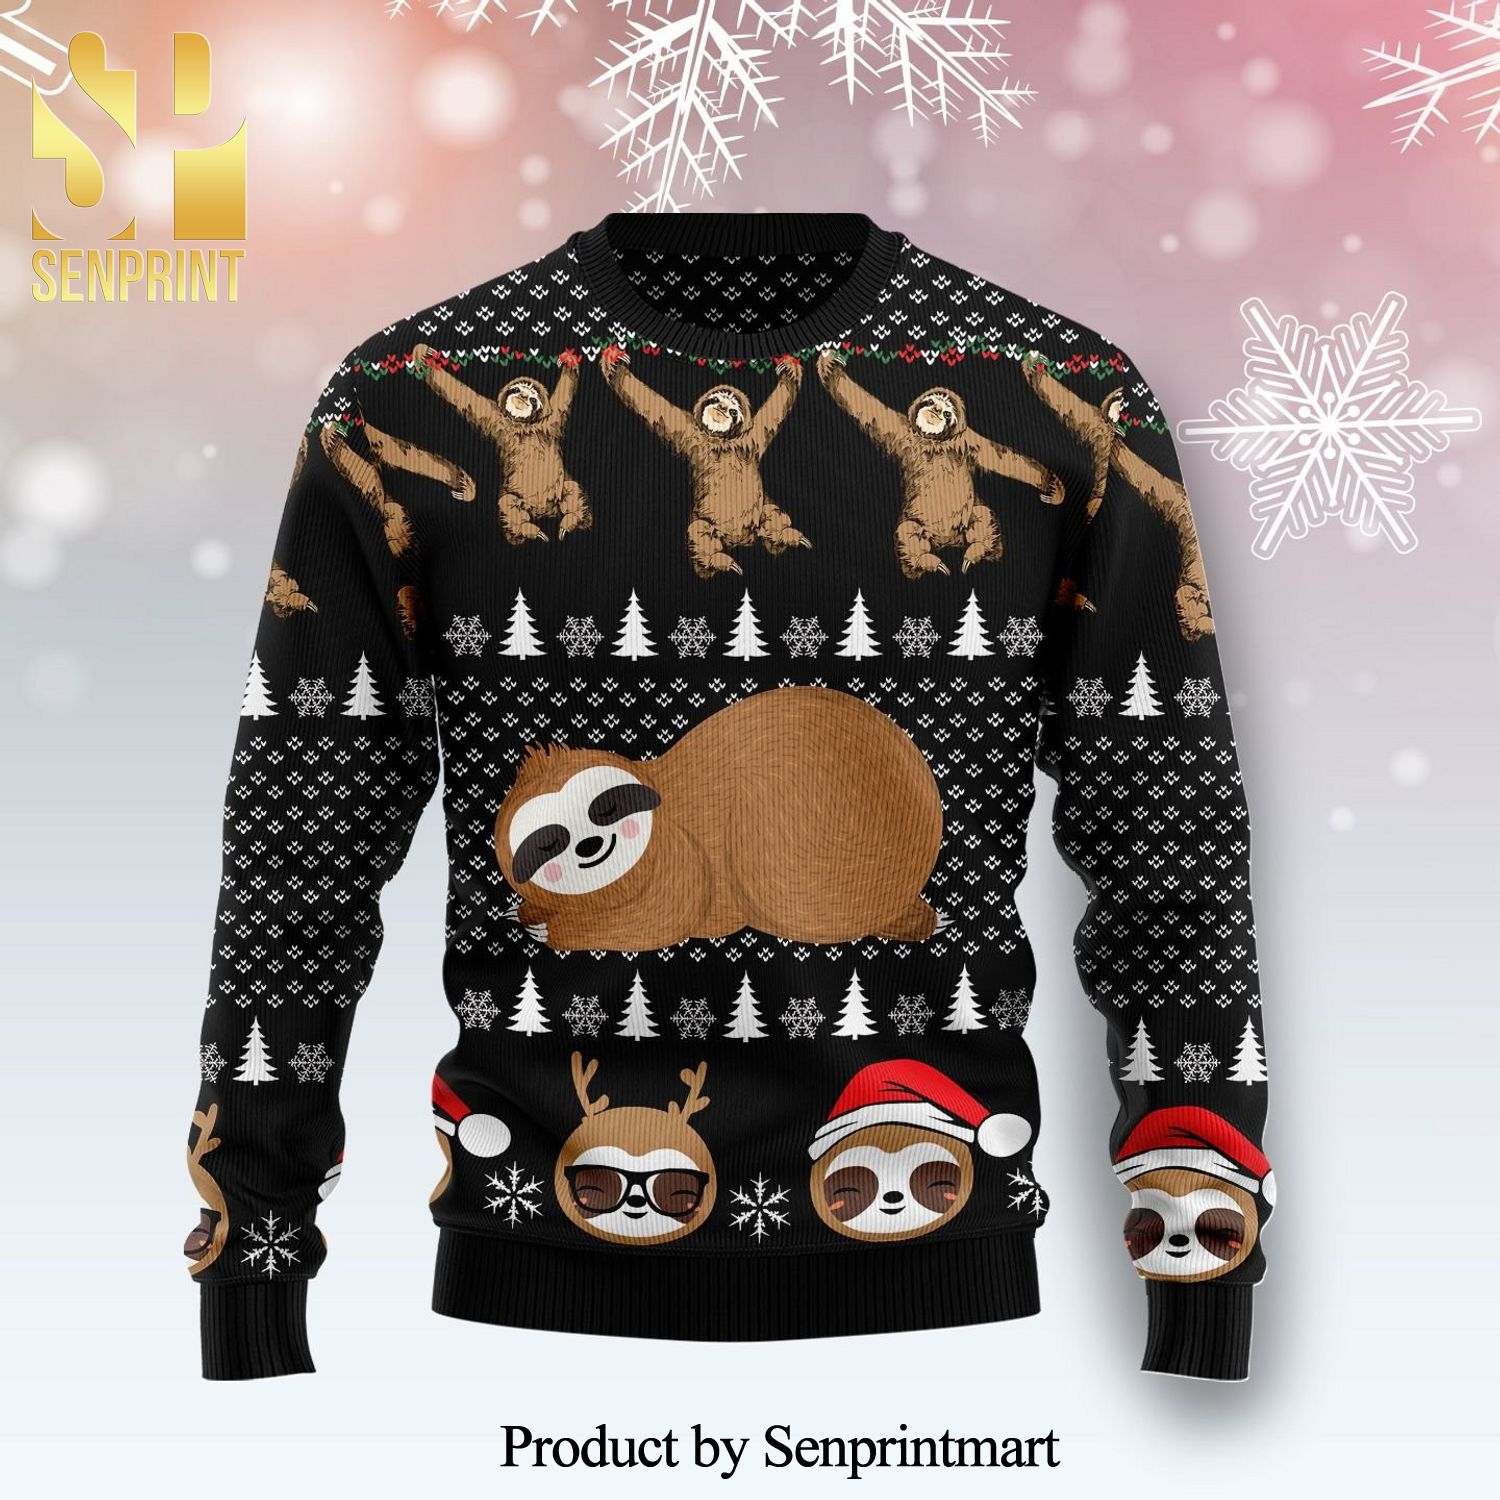 Chilling Sloth Knitted Ugly Christmas Sweater